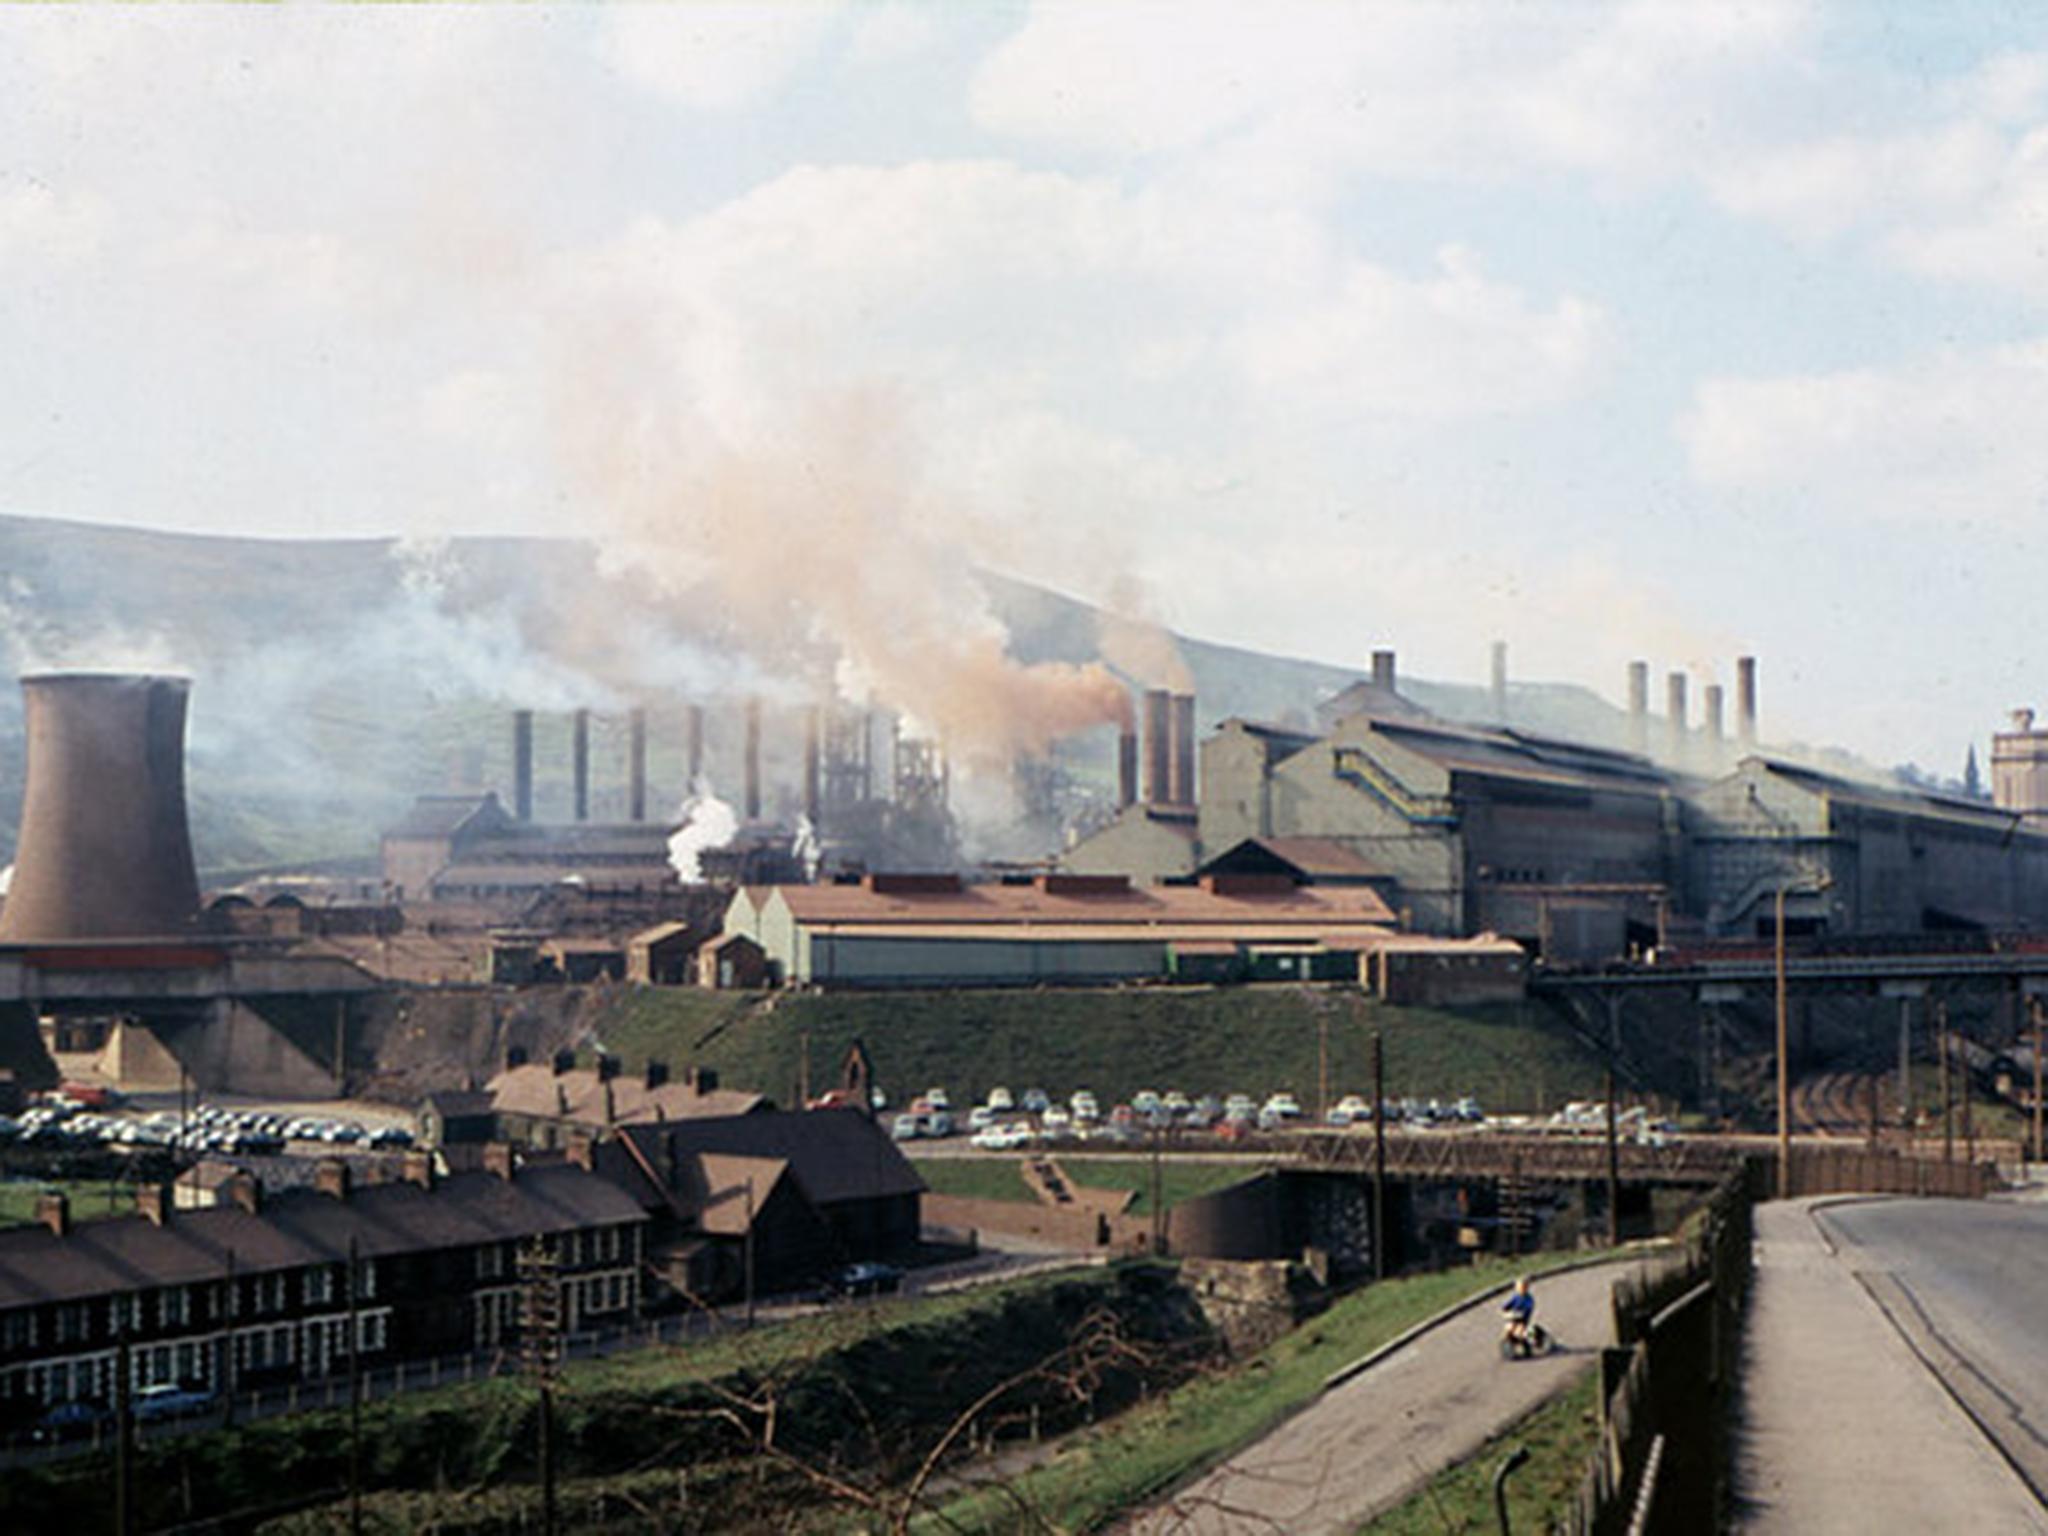 In the 1960s the Ebbw Vale steelworks employed 11,000 people